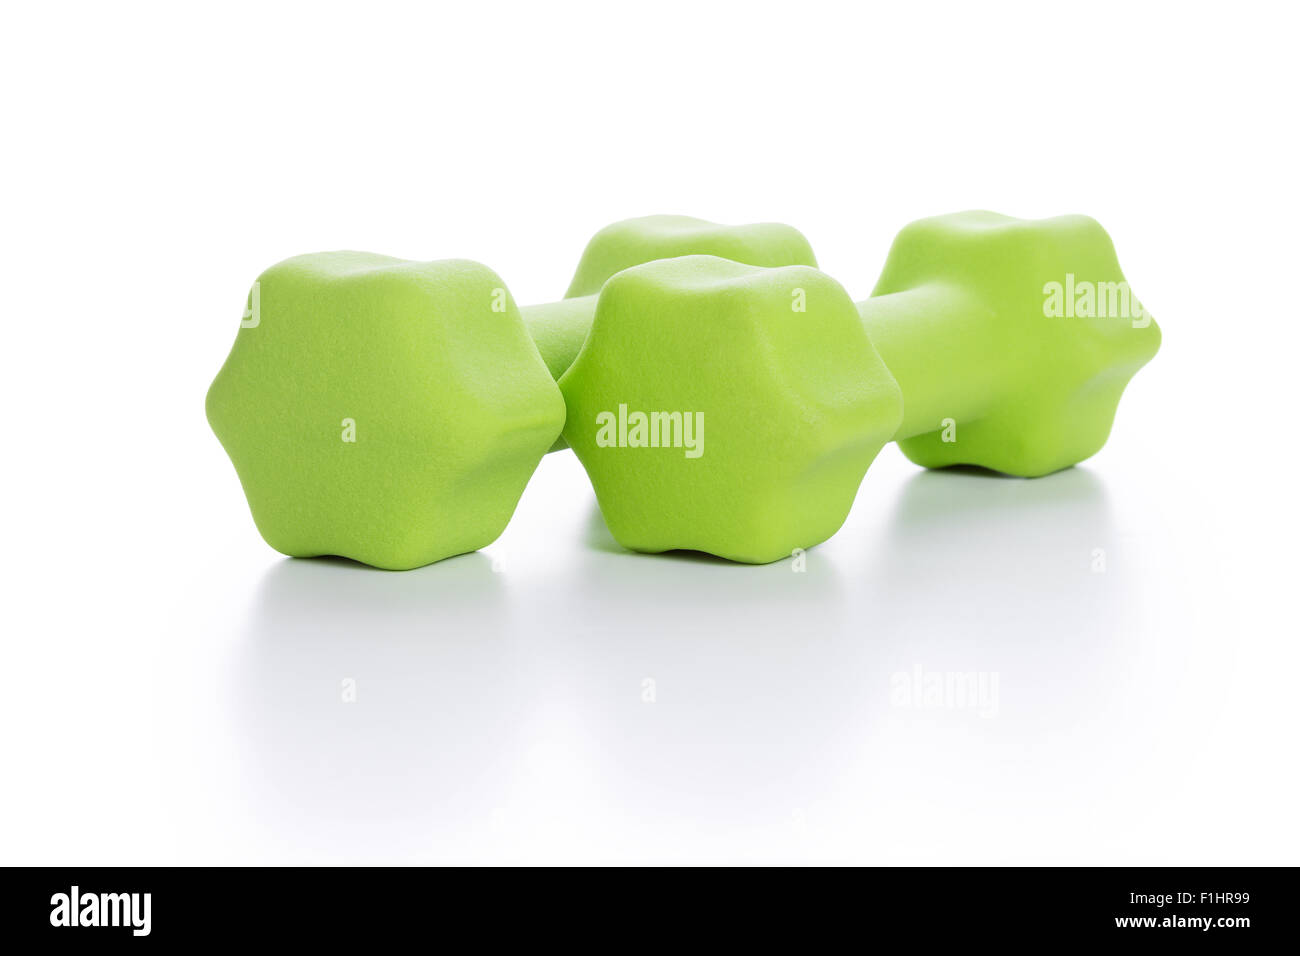 Fitness concept with two green dumbbells on white background, closeup Stock Photo